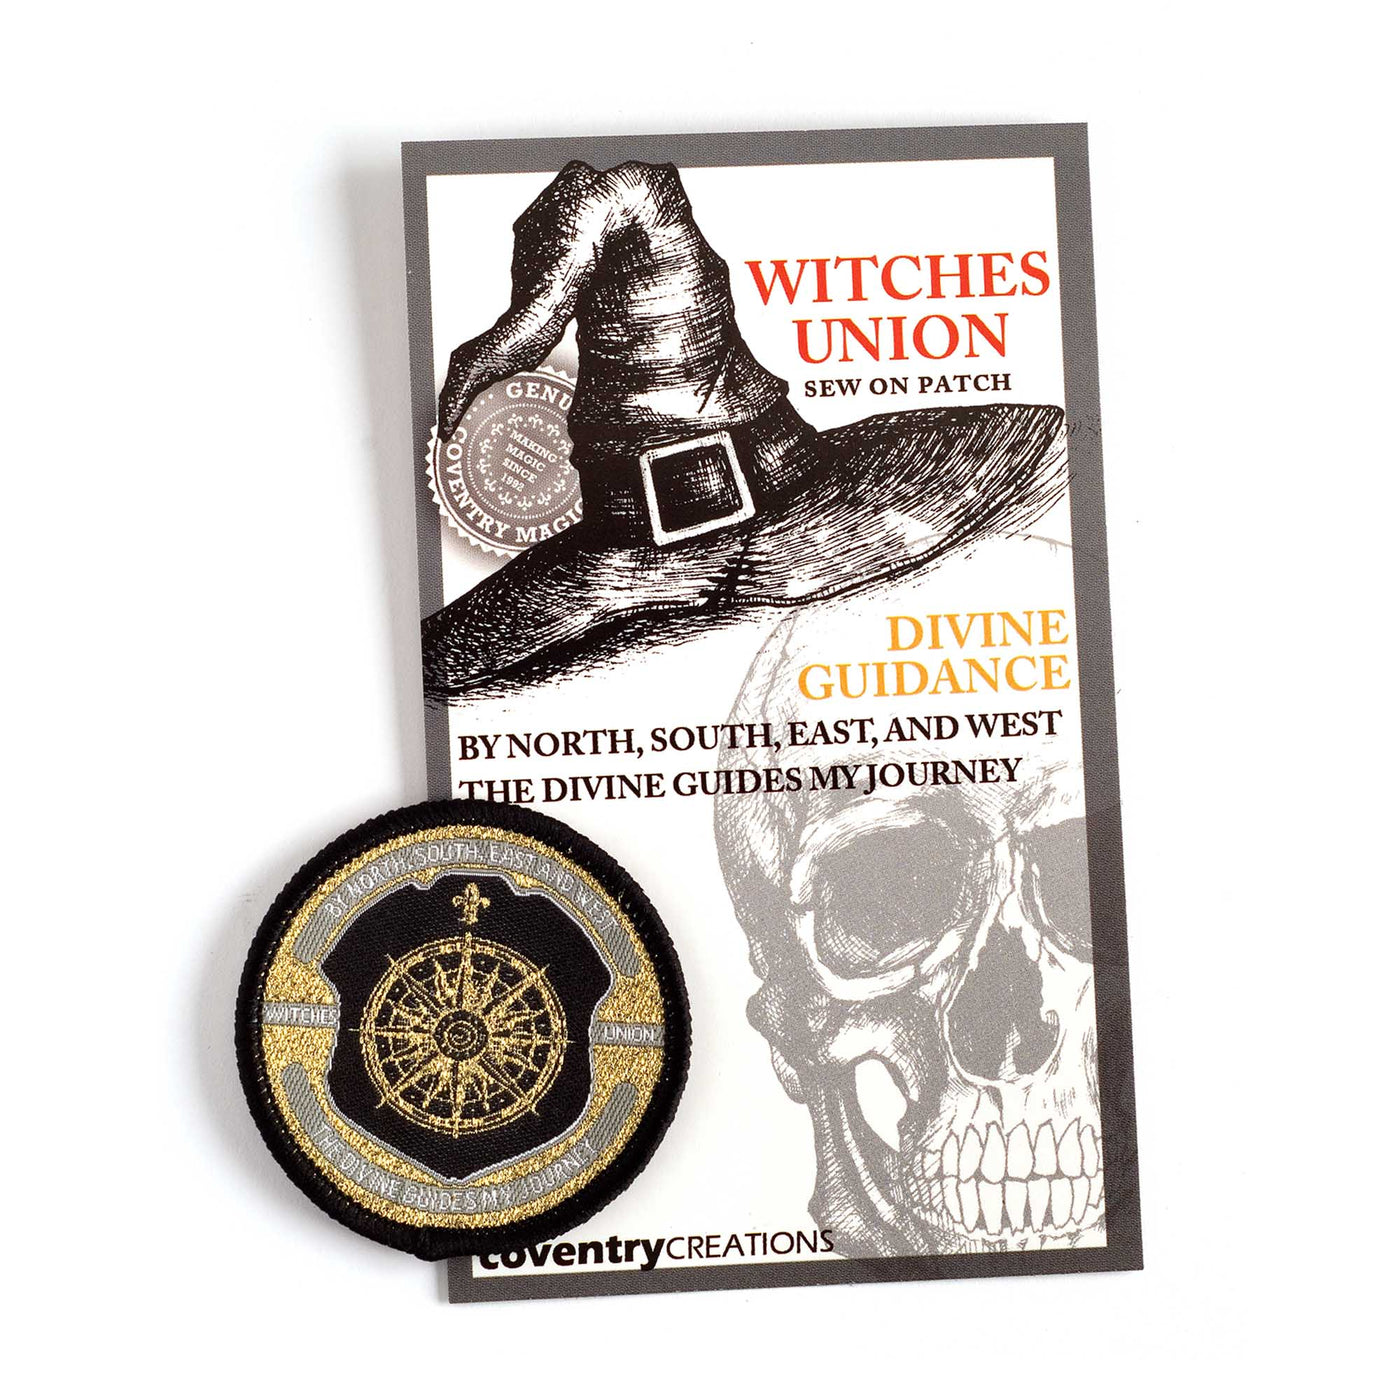 Coventry Creations Witches Union- Magical Adept Divine Guidance Patch with witch hat and skull in background 